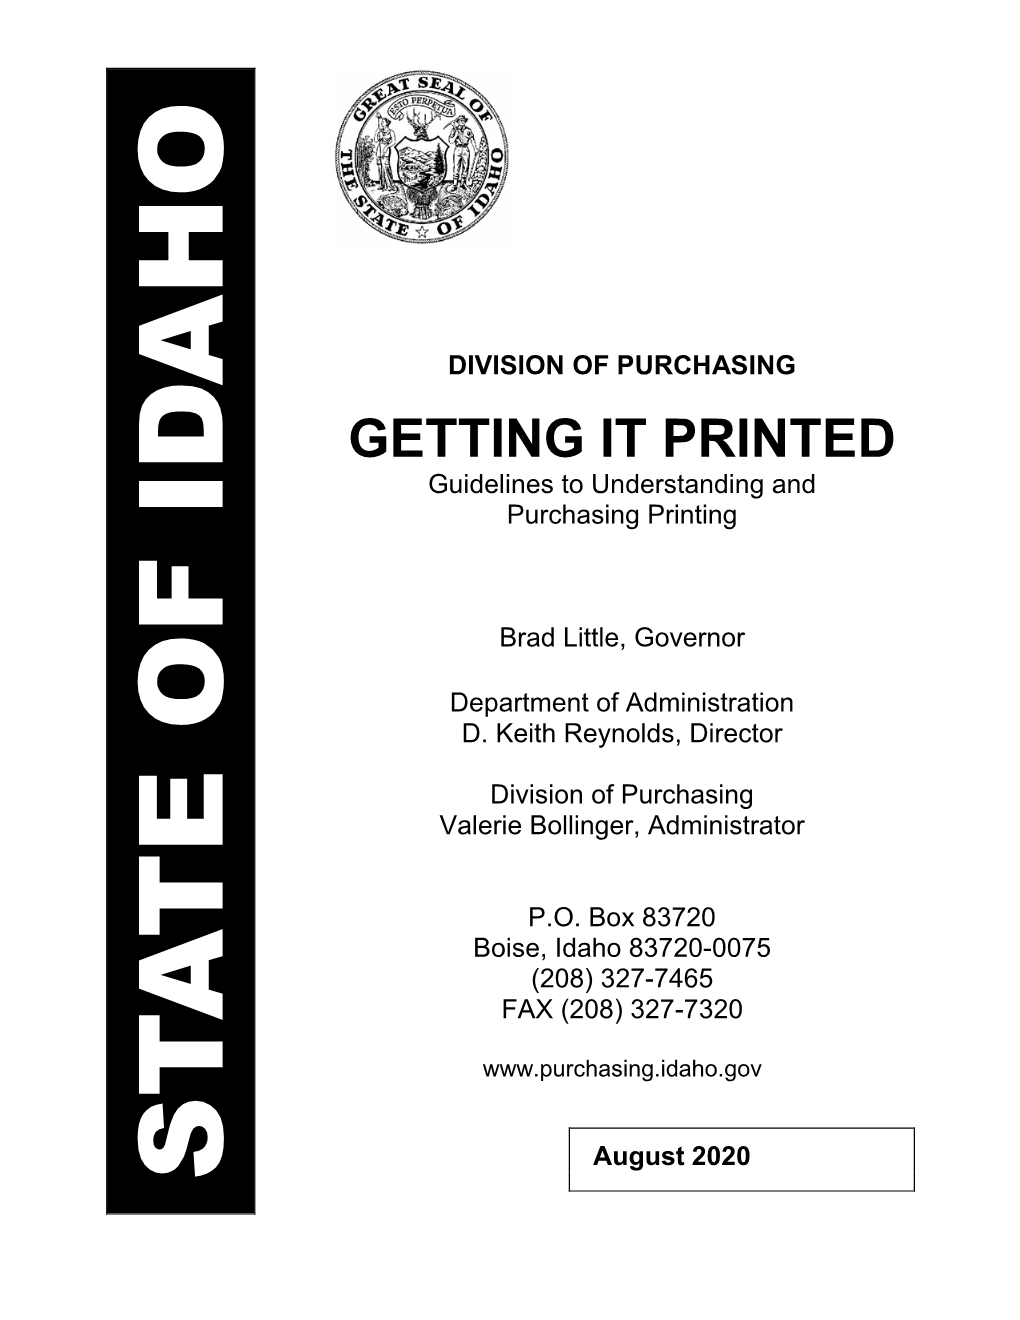 Getting It Printed: Understanding and Purchasing